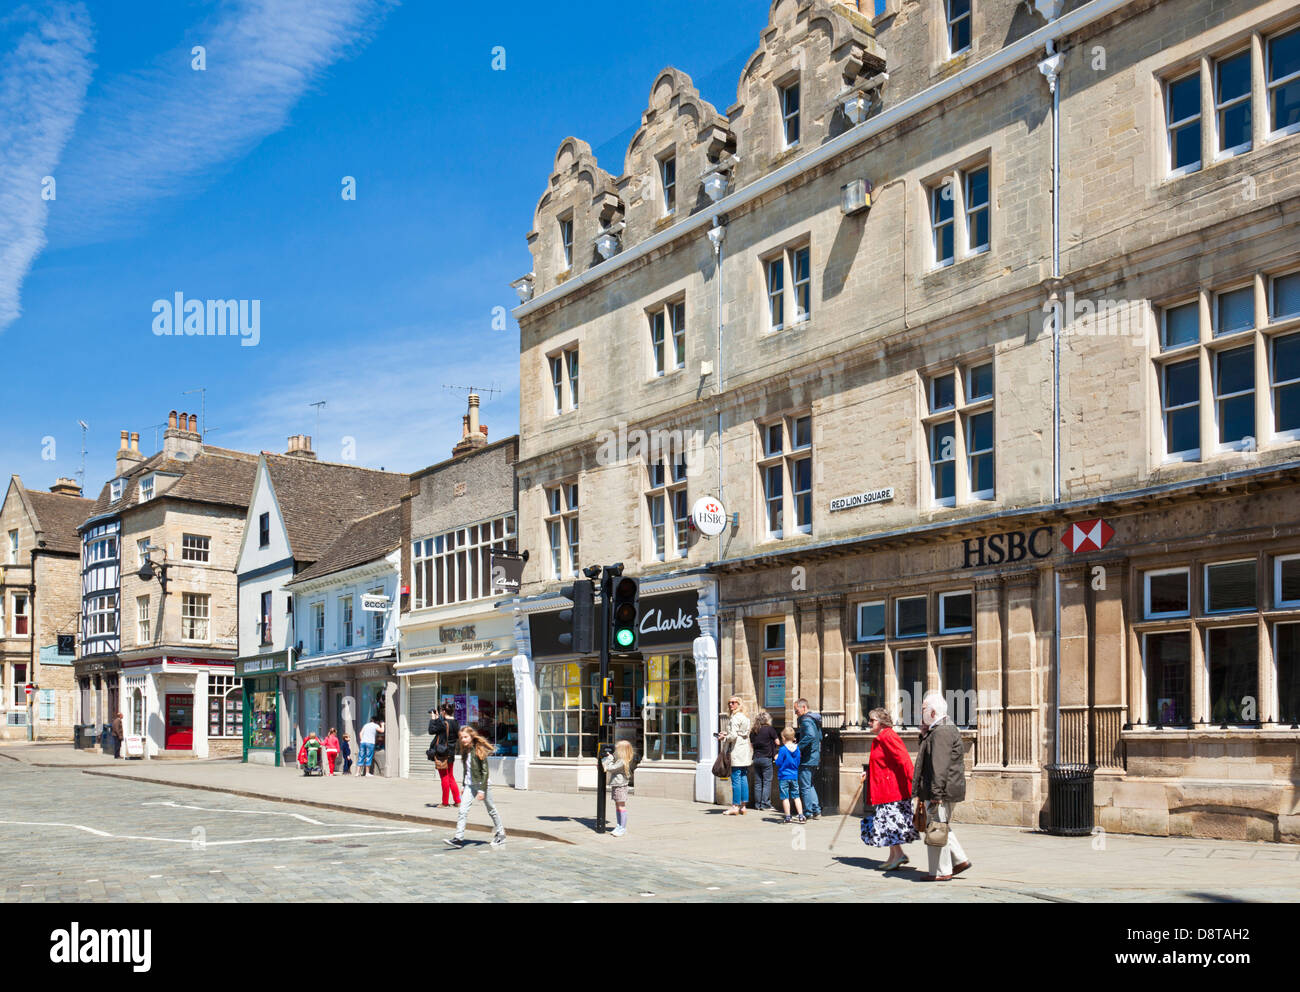 Red lion square in Stamford town centre Lincolnshire England UK GB EU Europe Stock Photo